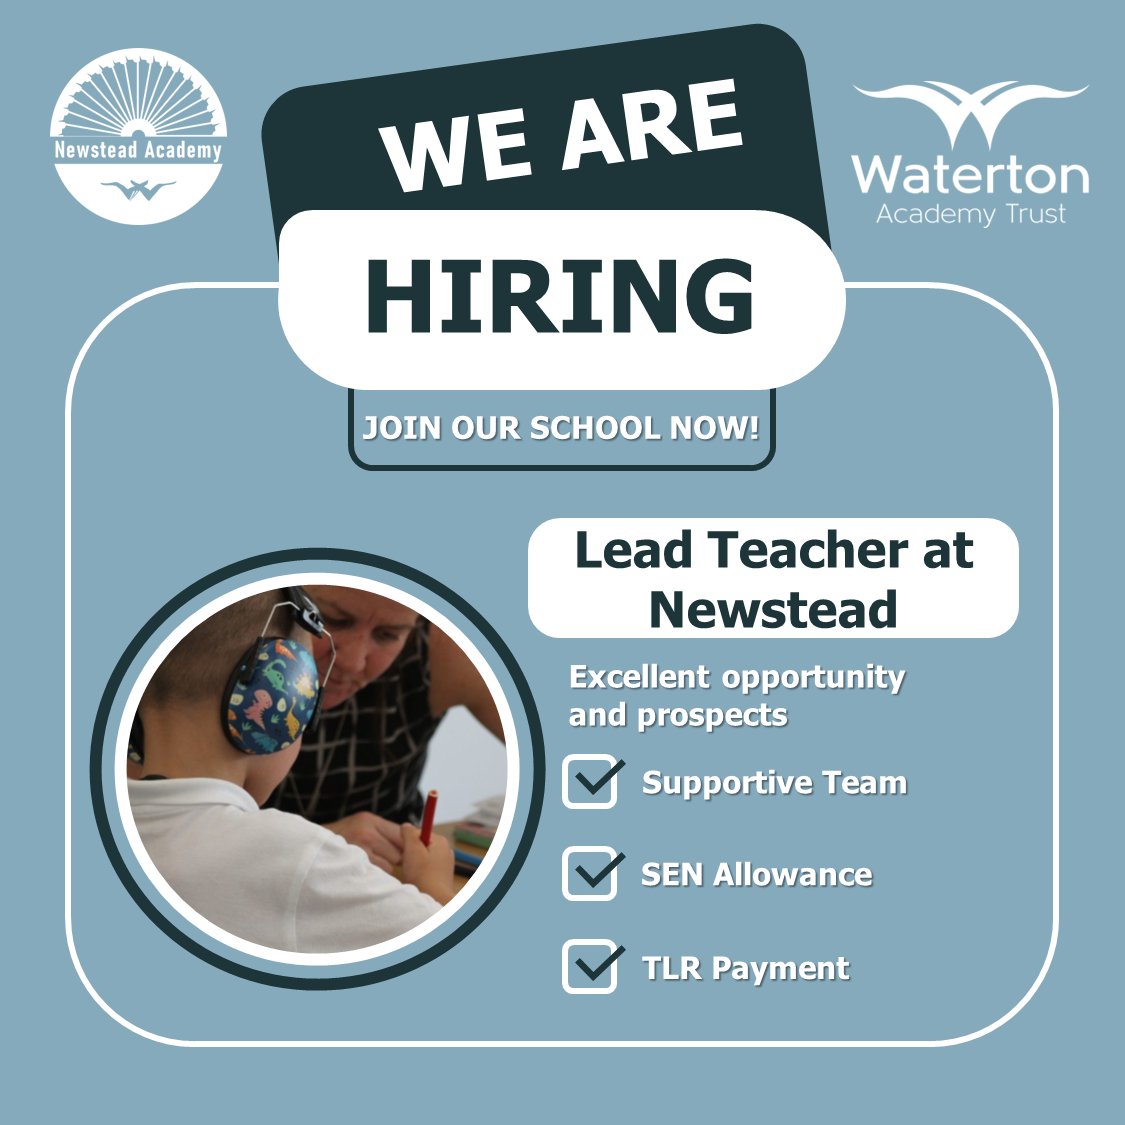 ⏳ Deadline Approaching! 🗓️ Closing Date: Monday 13th May 🏫 @NewsteadAcademy seeks an inspirational Lead Teacher 📧 Don't miss out on this opportunity to make a difference! 🔗 Apply today: watertonacademytrust.org/recruitment #EducationCareers #TeachingJobs